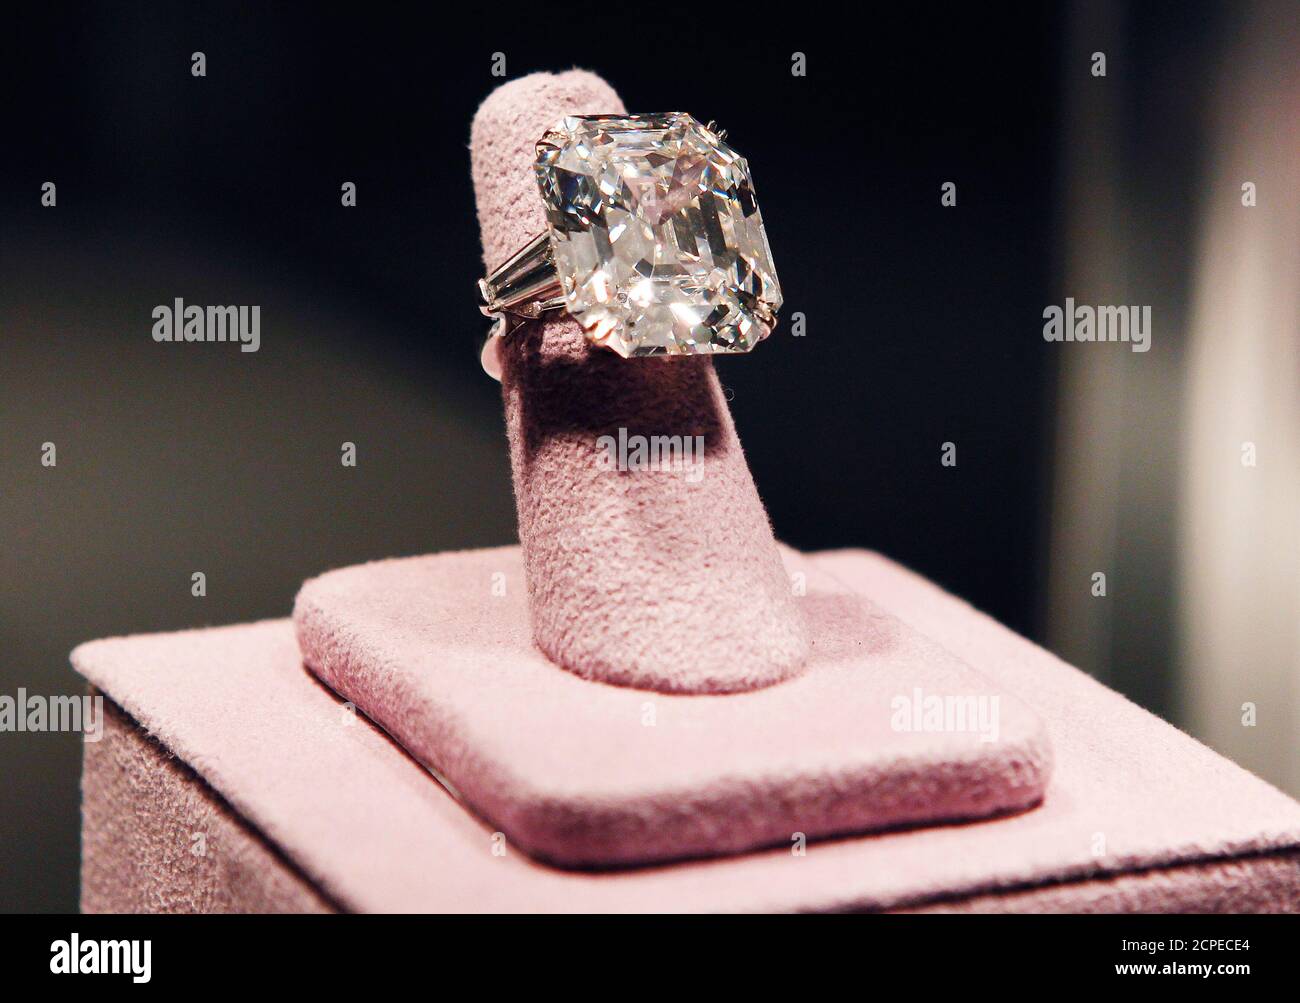 A 33.19 carats diamond ring given to Elizabeth Taylor by her fifth husband  Richard Burton is pictured at the press preview for Christie's auction of  The Collection of Elizabeth Taylor featuring her